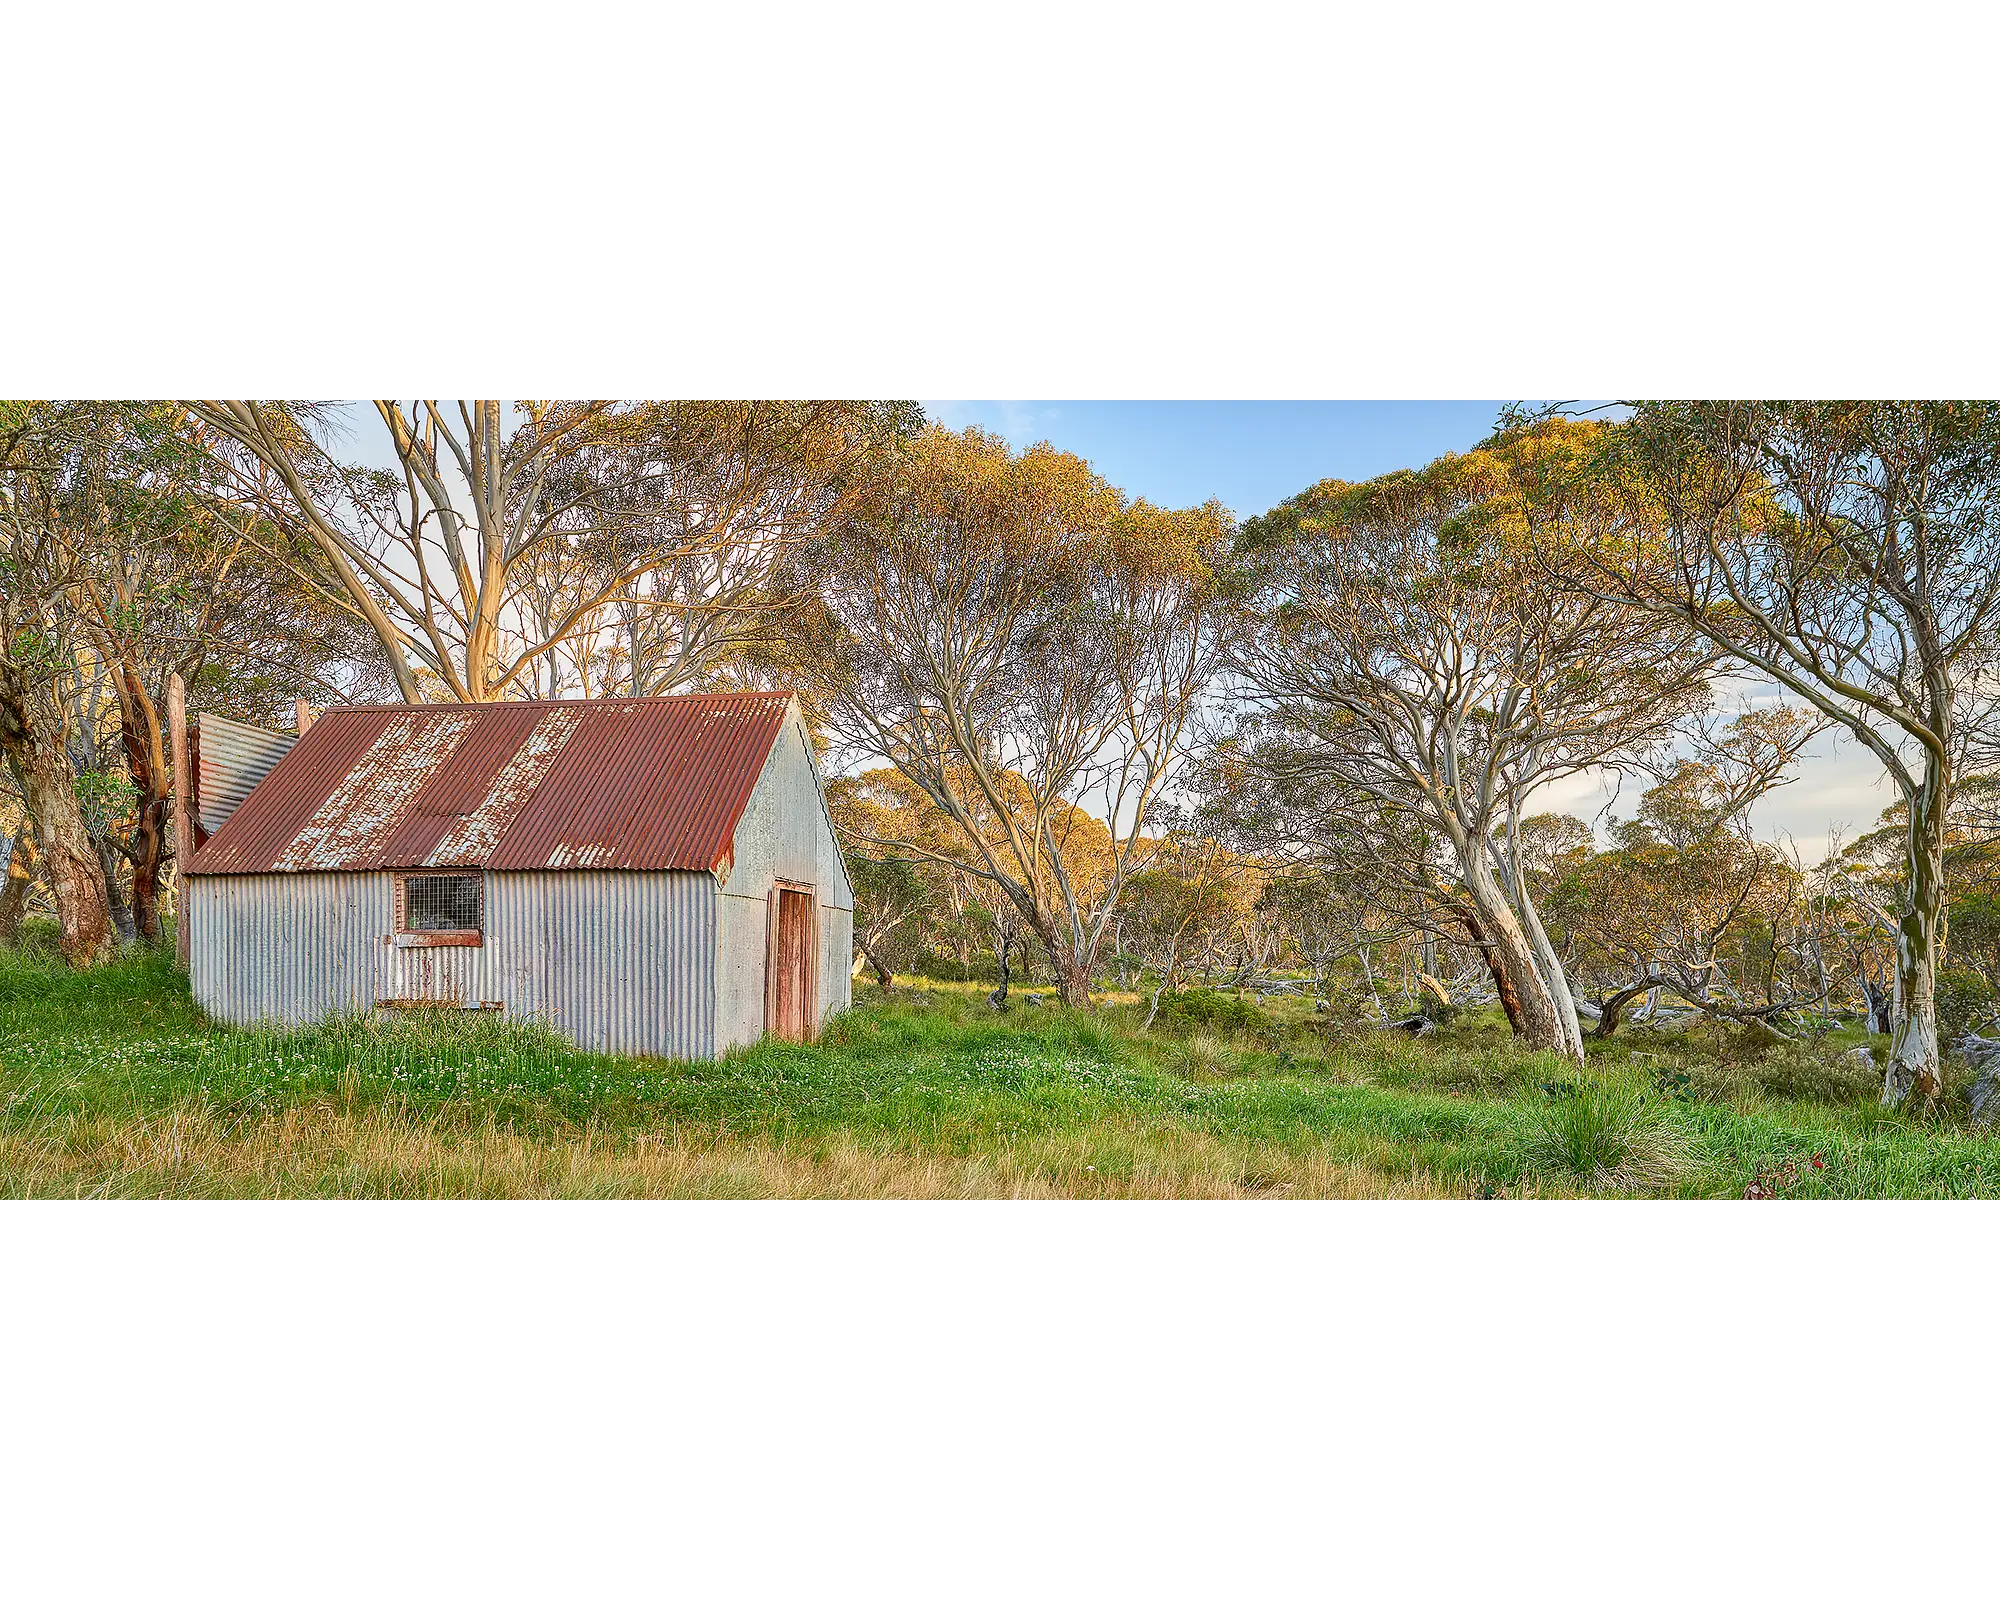 CRB Hut in summer, Dinner Plain, Victorian High Country.